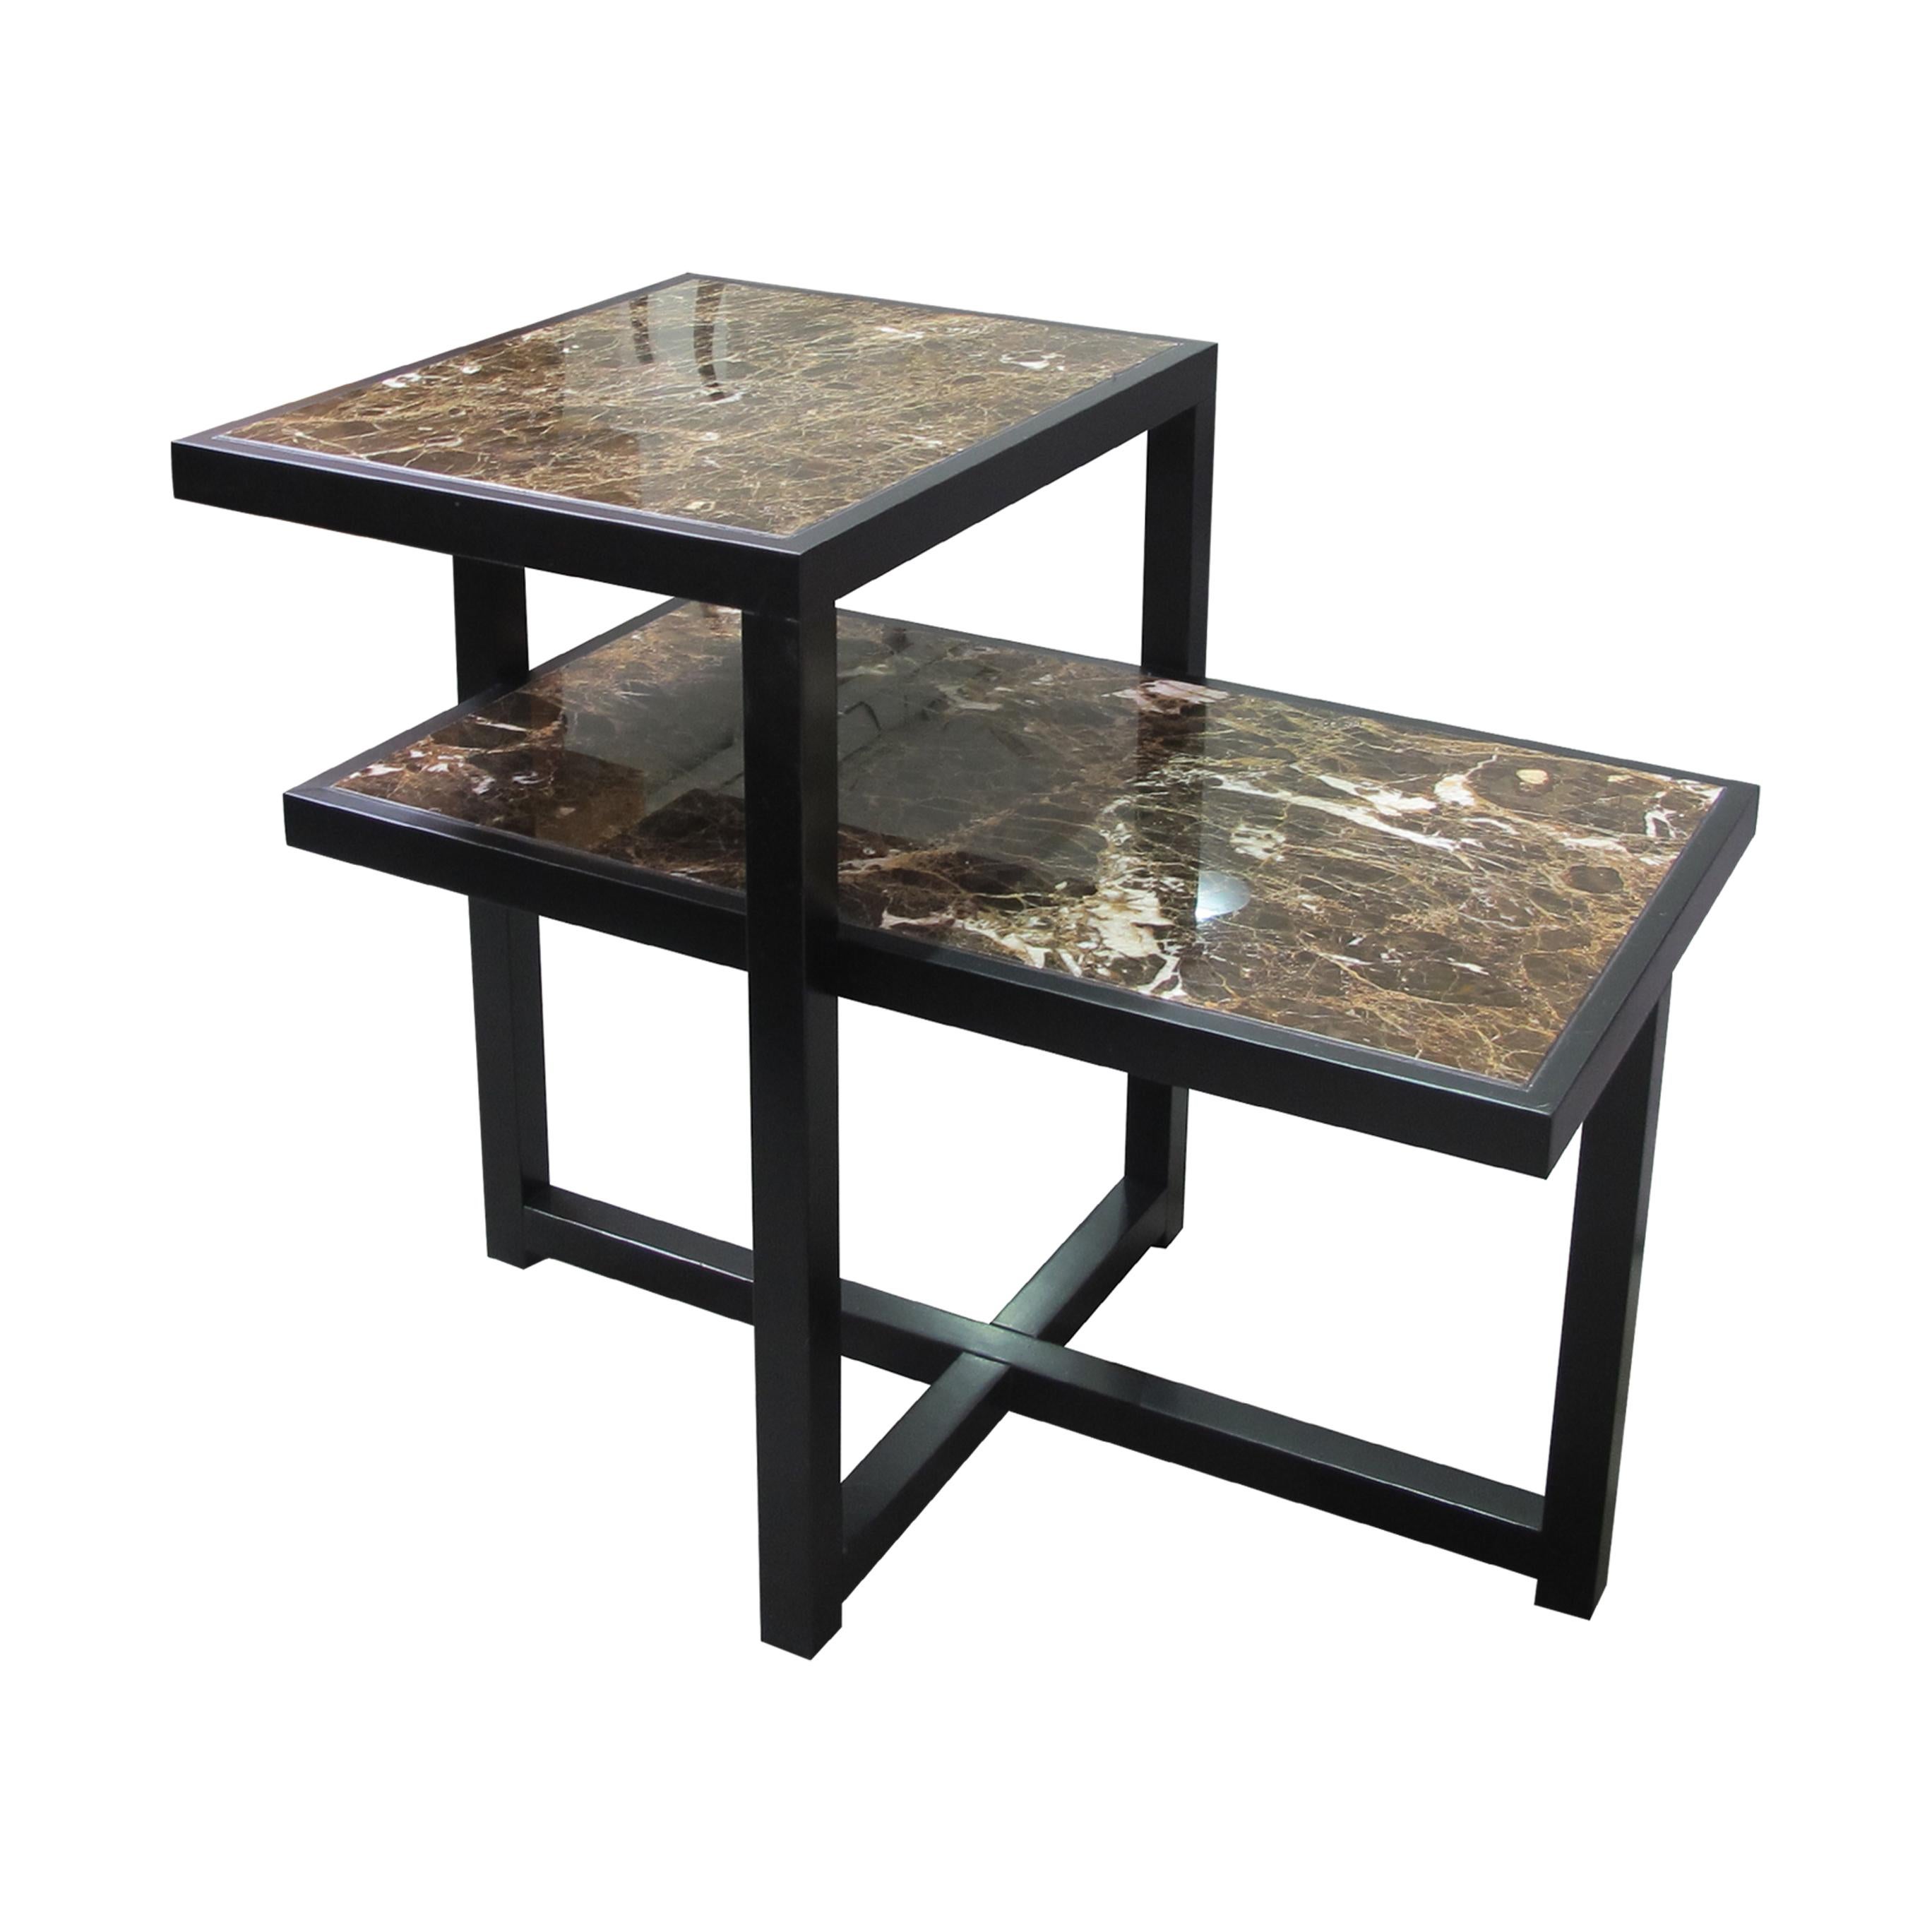 Pair of 1960s Italian Two-Tiered Side Tables with Marrón Emperador Marble Top 3